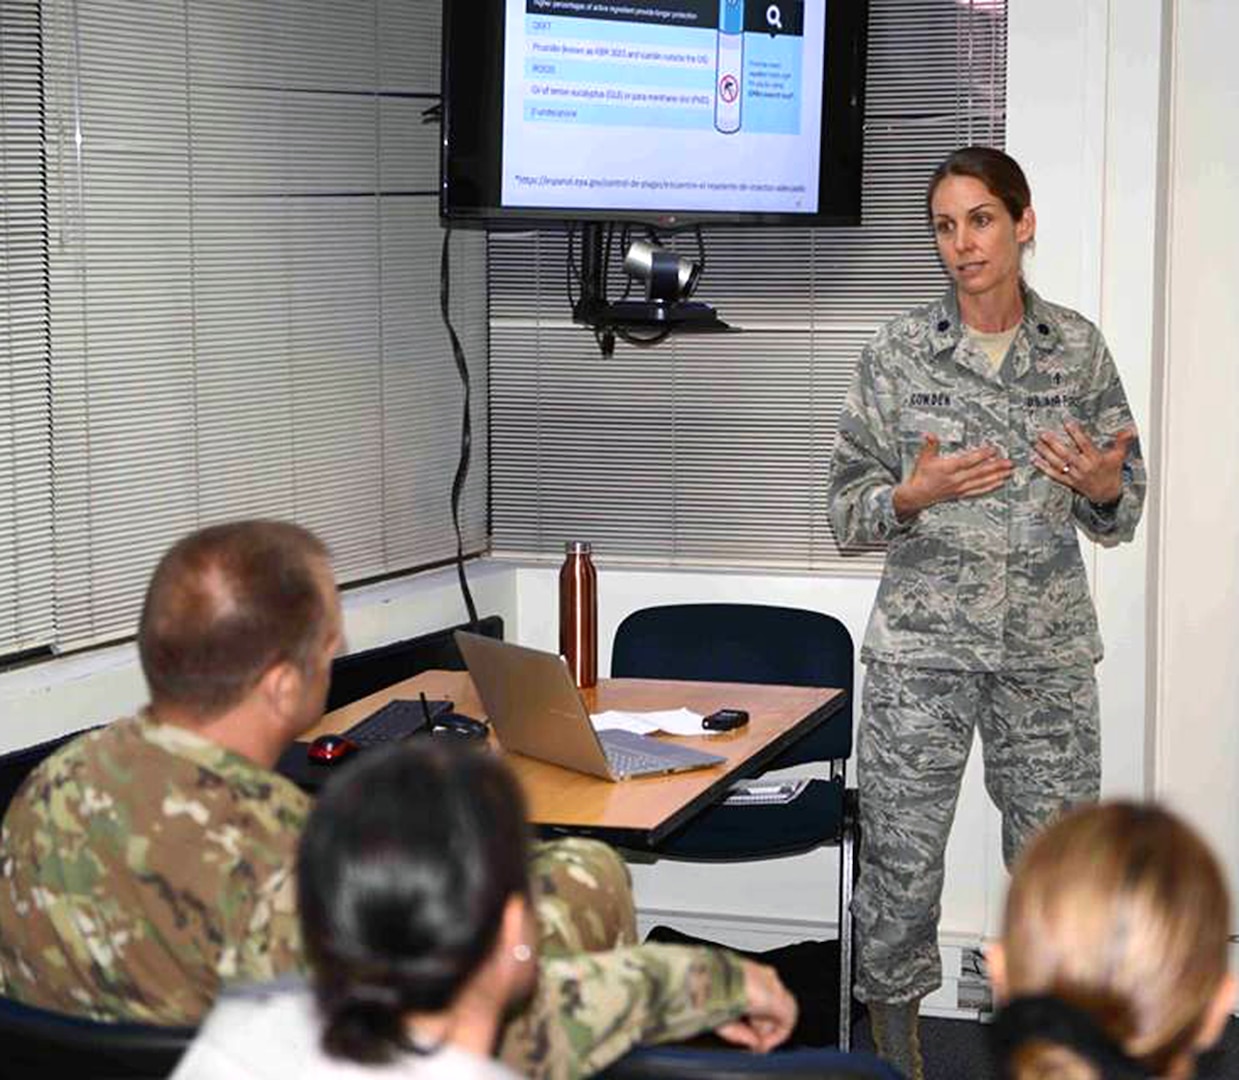 U.S. Air Force Lt. Col. Jessica Cowden from the Defense Institute of Medical Operations, gives a lecture on preventive measures for malaria to Chilean Army Veterinary Corps Soldiers and attendees during a vector control practices seminar in Santiago, Chile, April 17. Cowden specializes in infectious diseases and pediatric medicine.